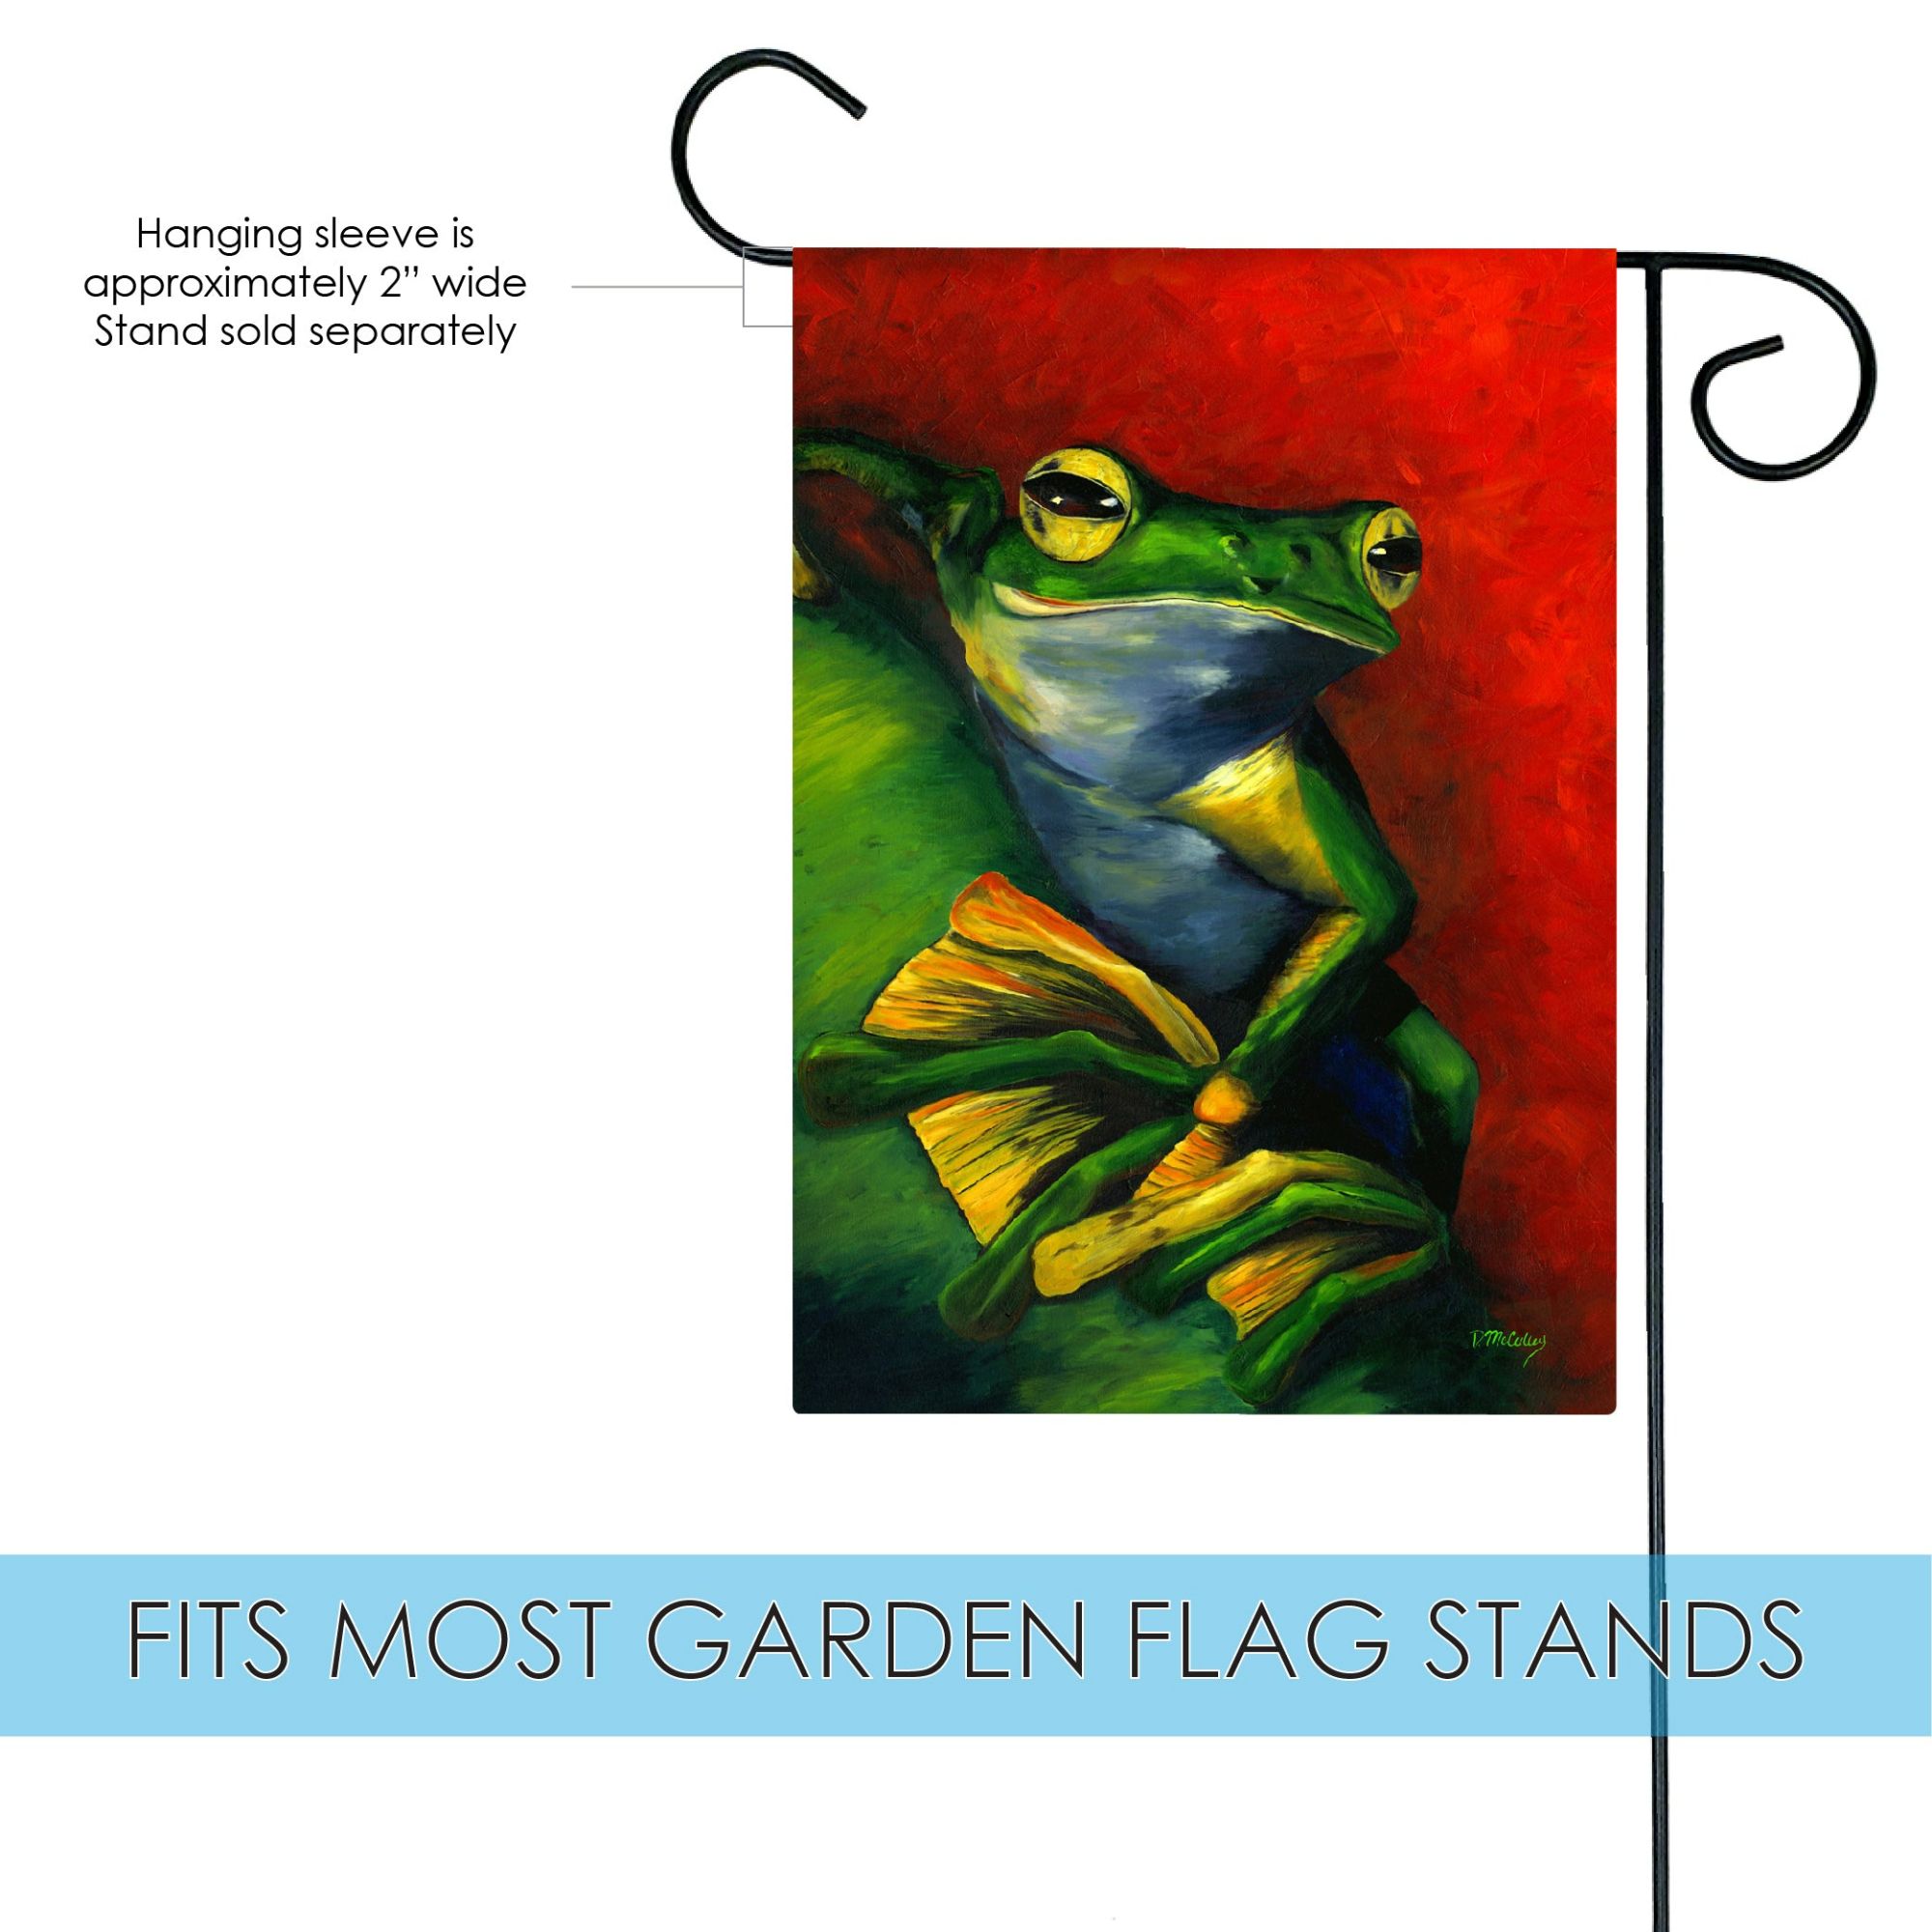 Toland Home Garden Red and Green Tranquil Tree Frog Outdoor Garden Flag 18" x 12.5"